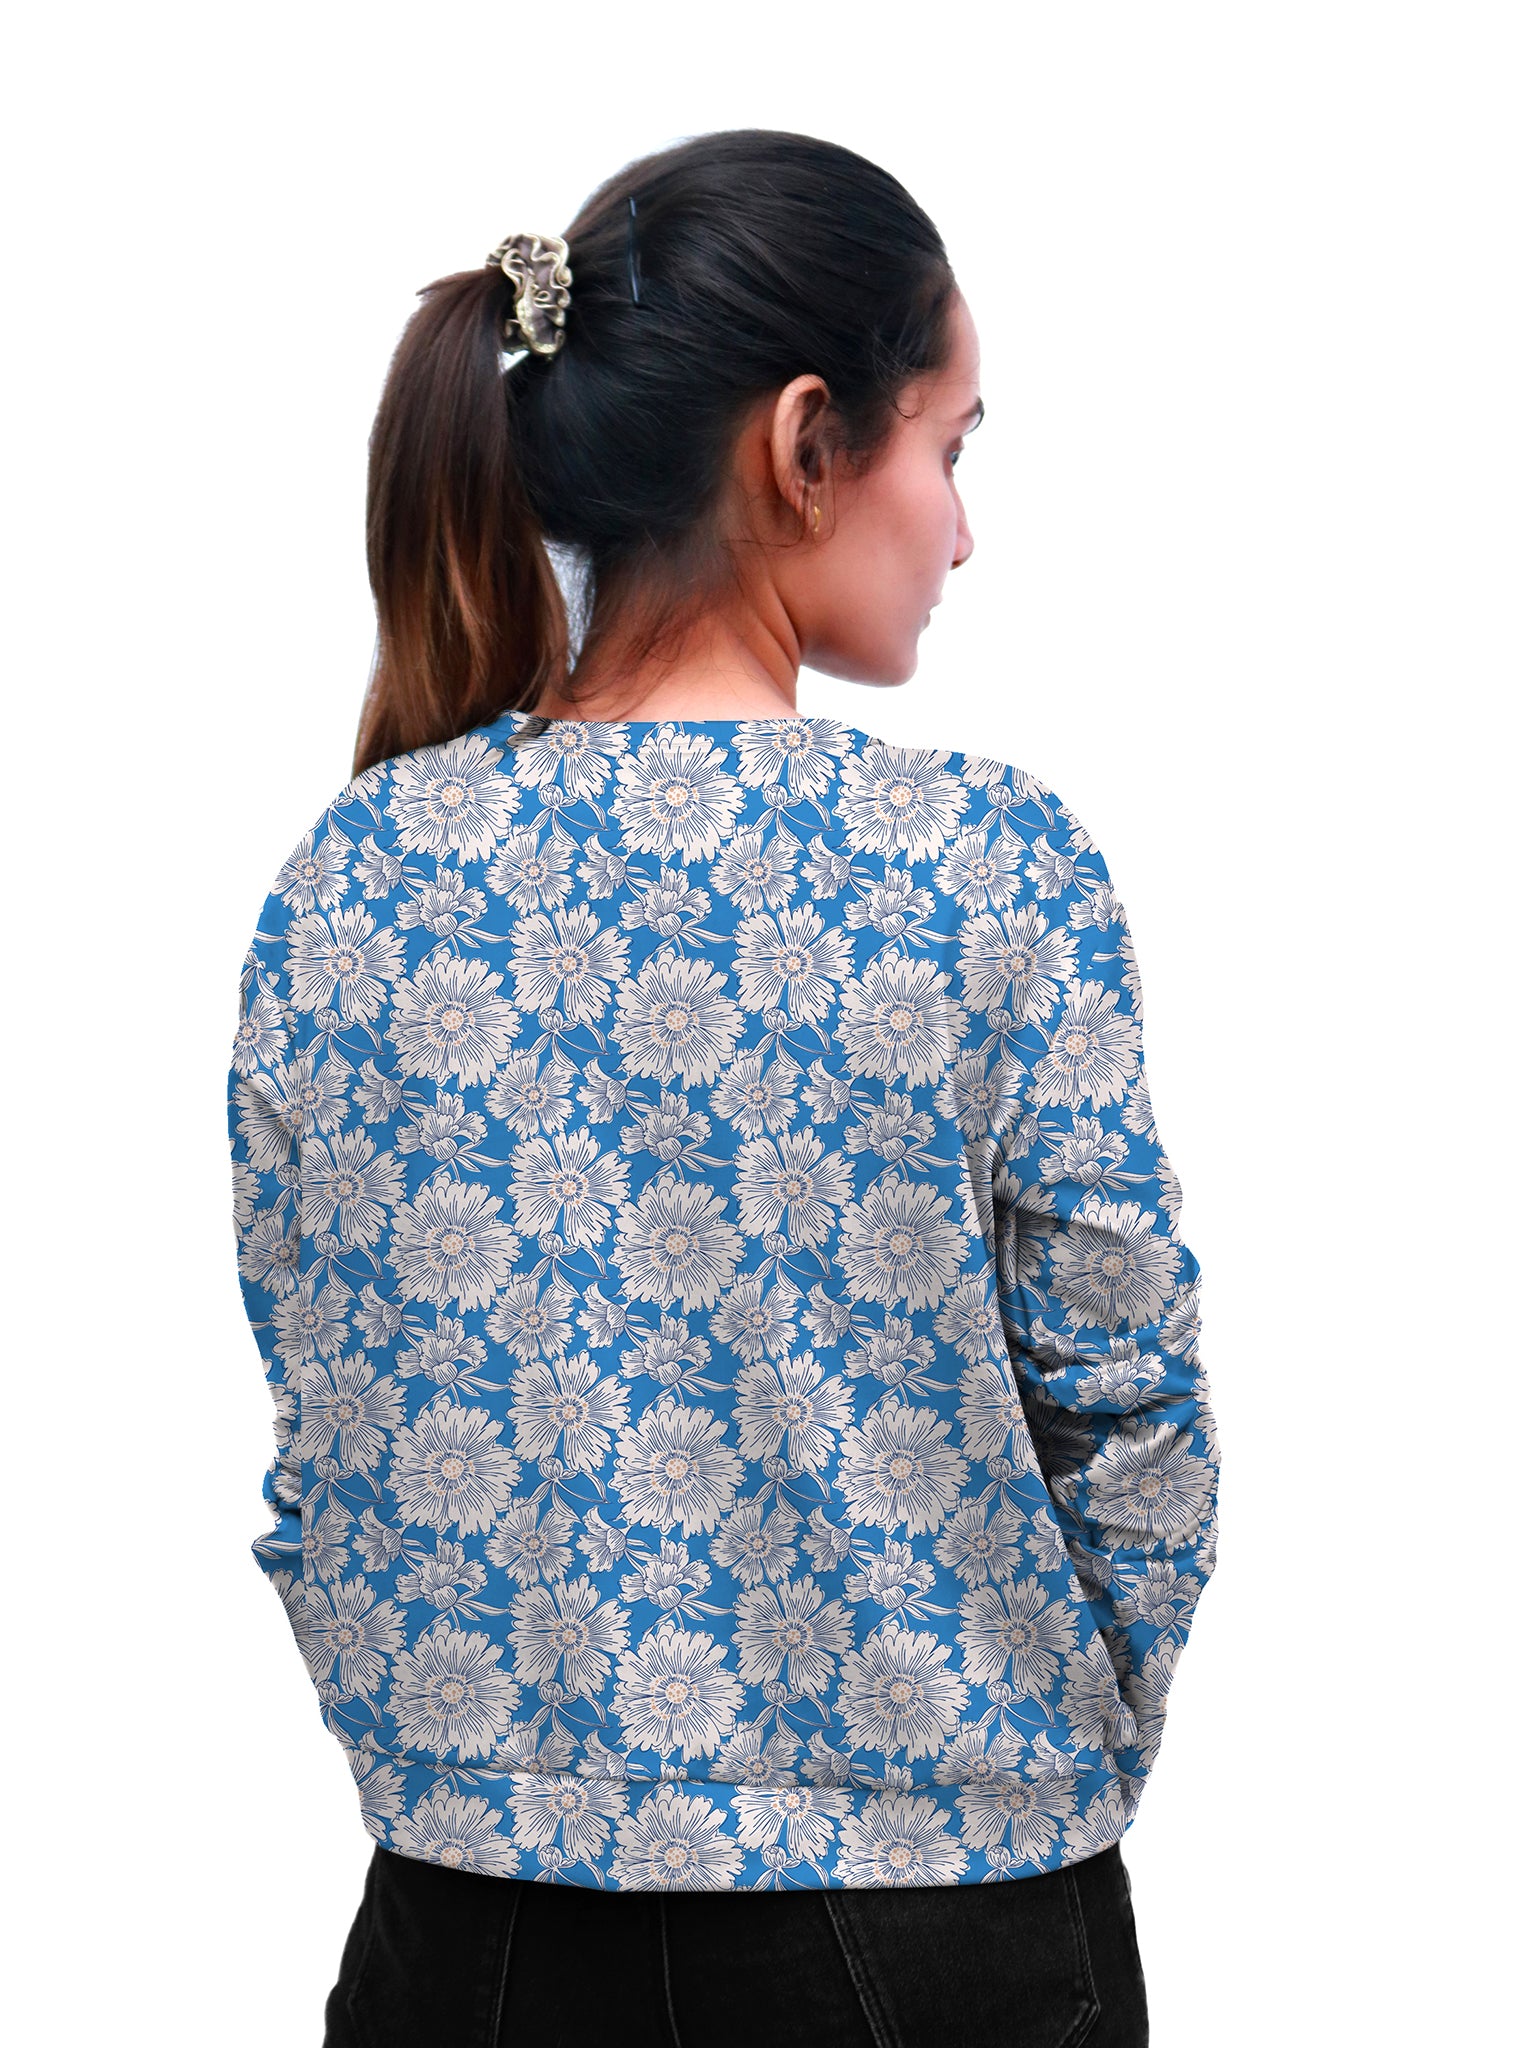 Turkish Blue Top With Gray Floral Printed